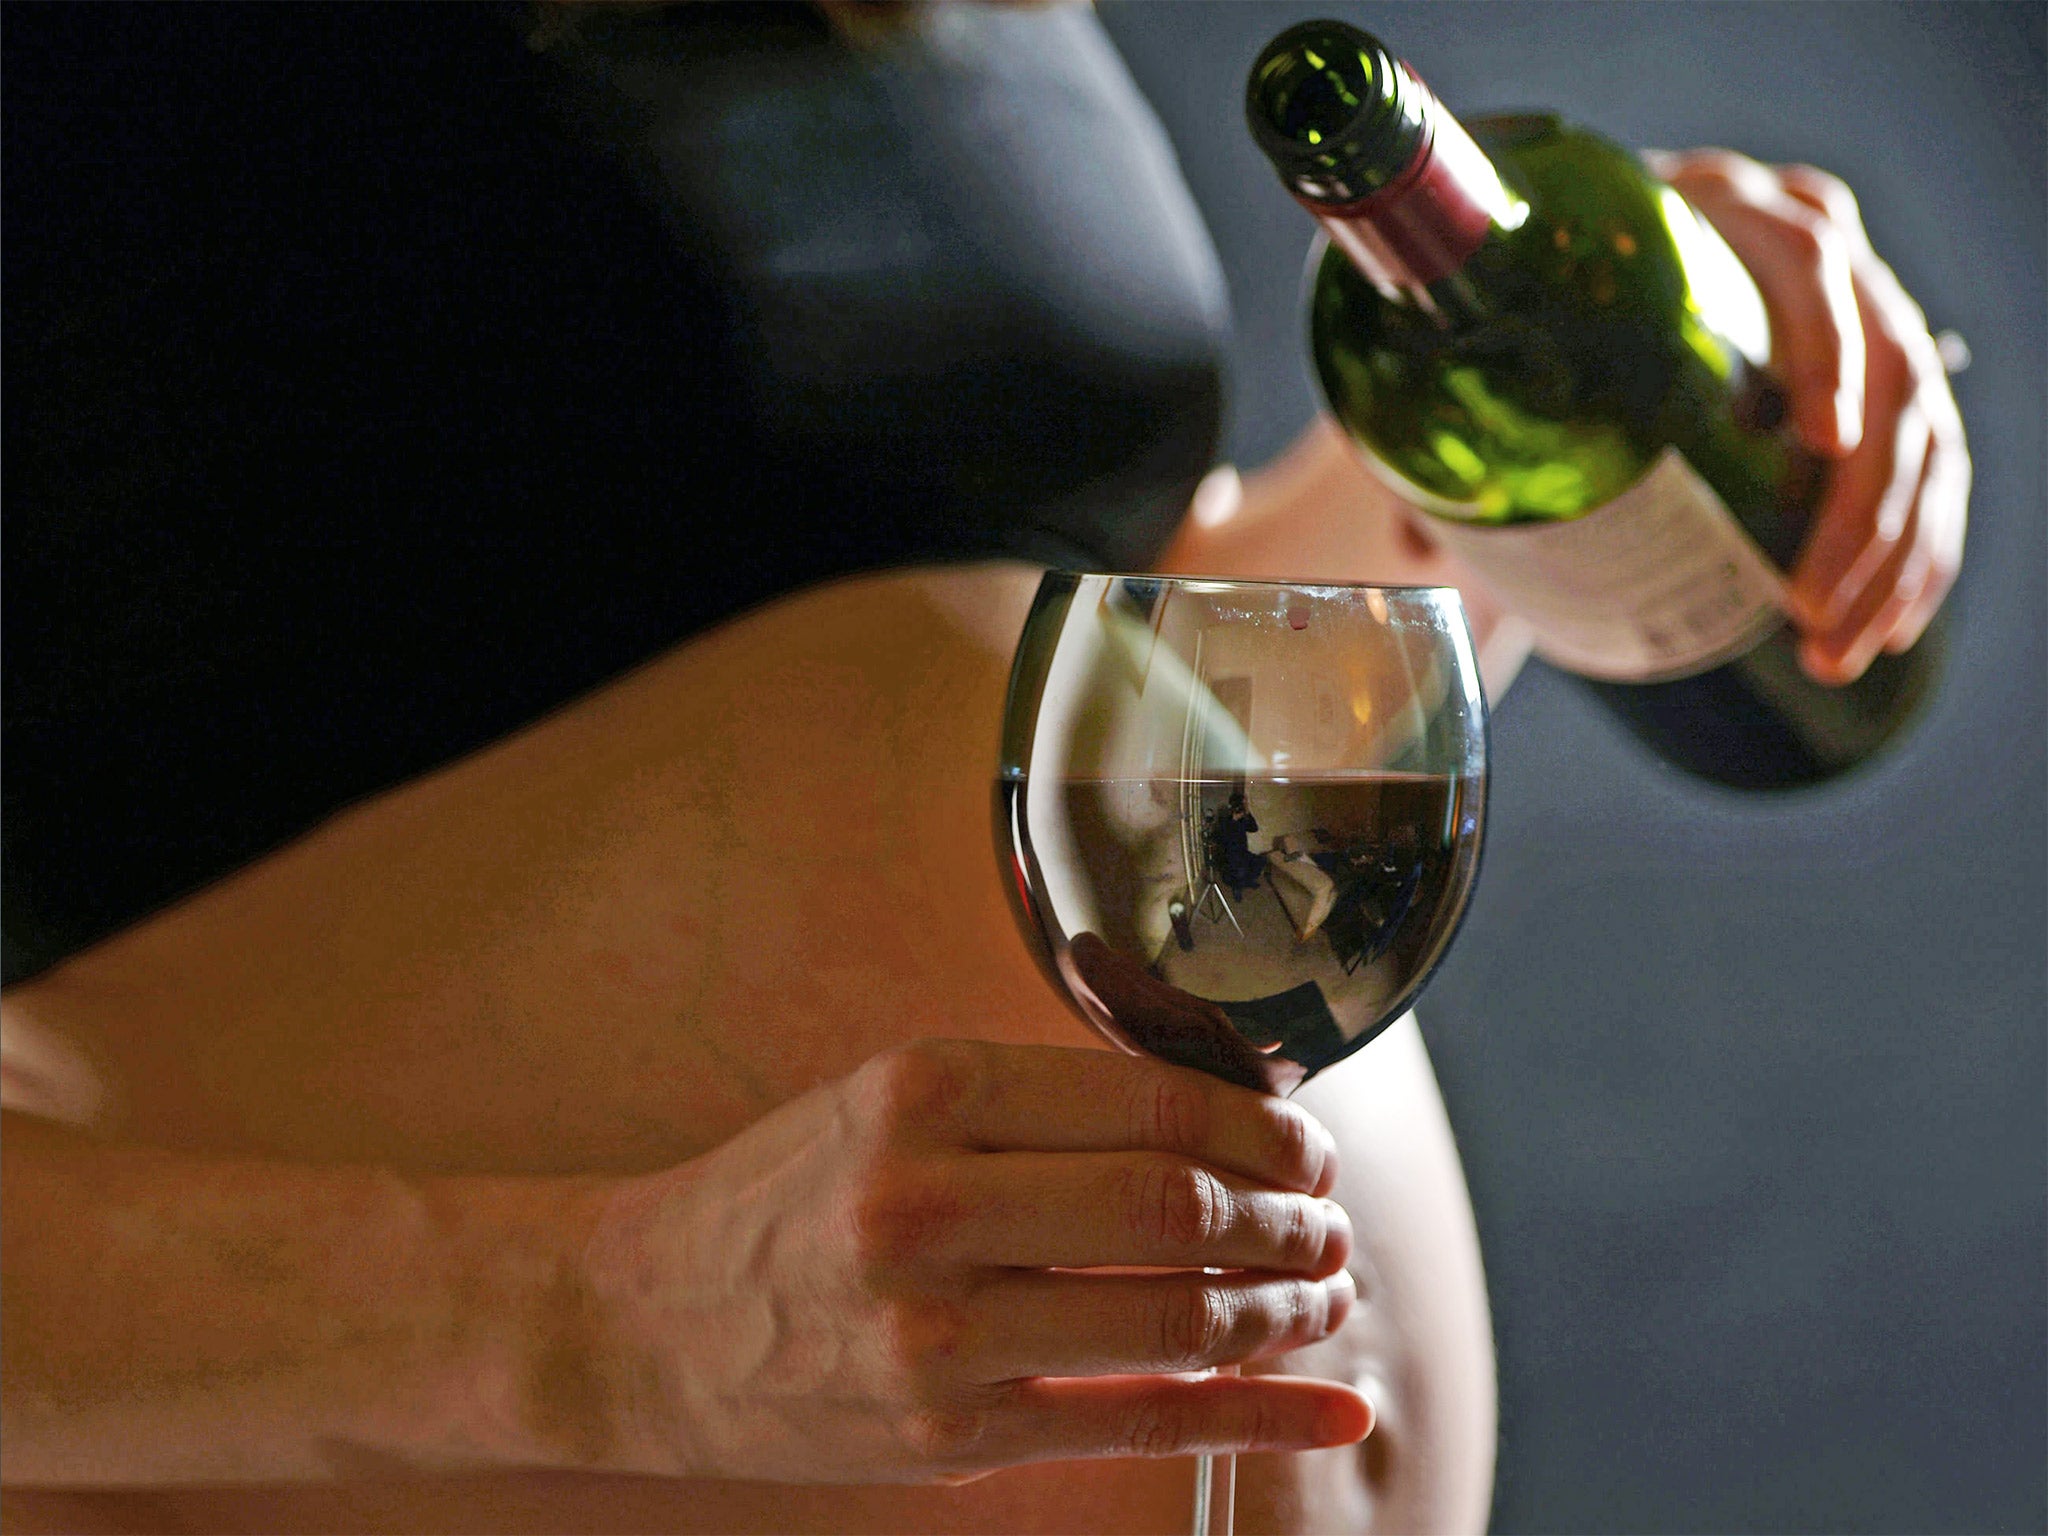 Pregnant Women Should Be Advised To Totally Avoid Alcohol The